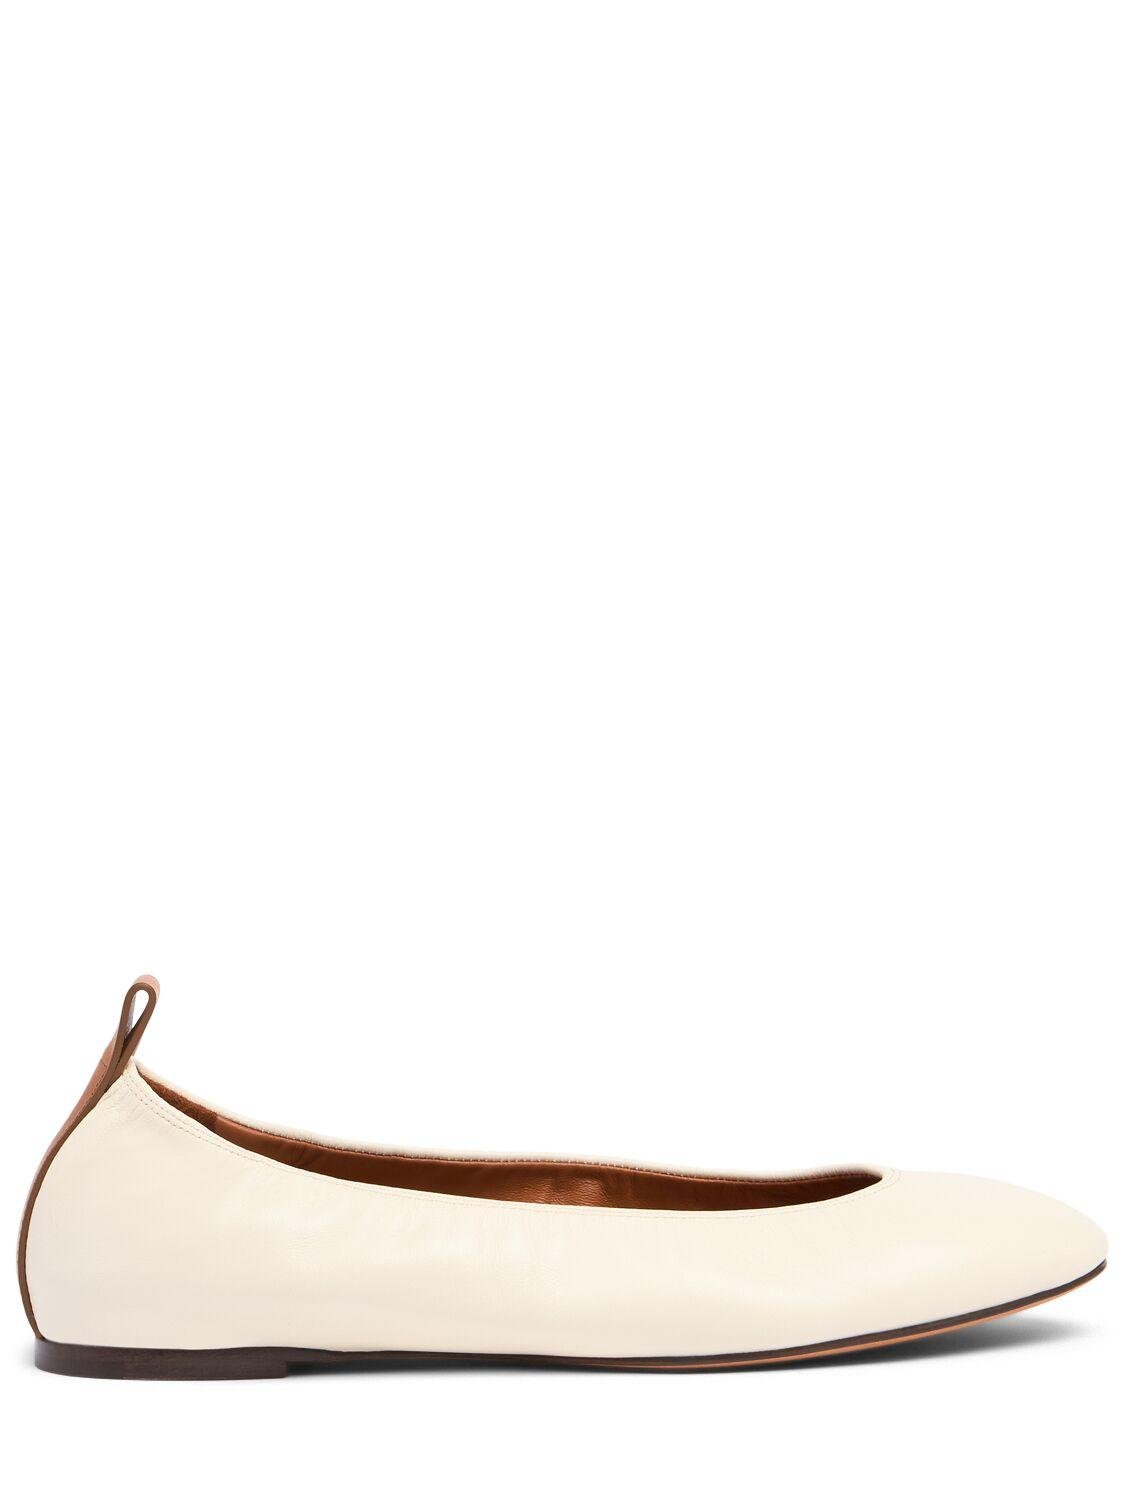 5mm Leather Ballerina Flats by LANVIN